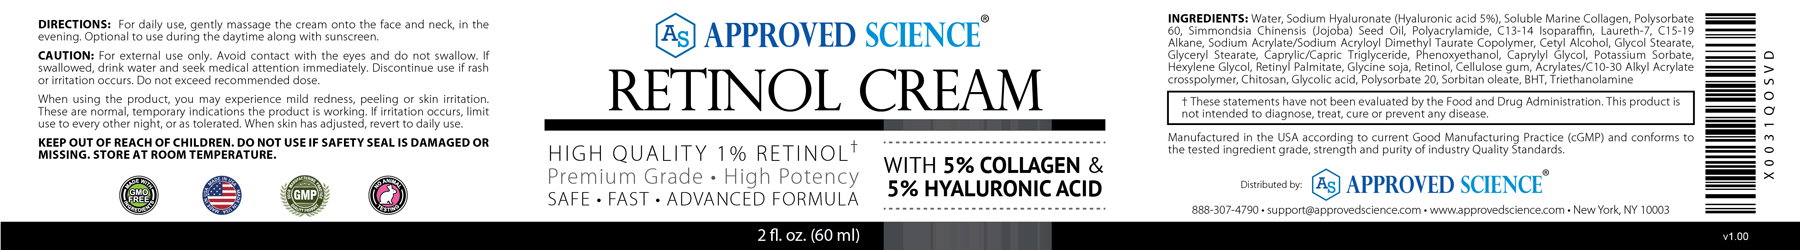 Approved Science® Retinol Cream Supplement Facts